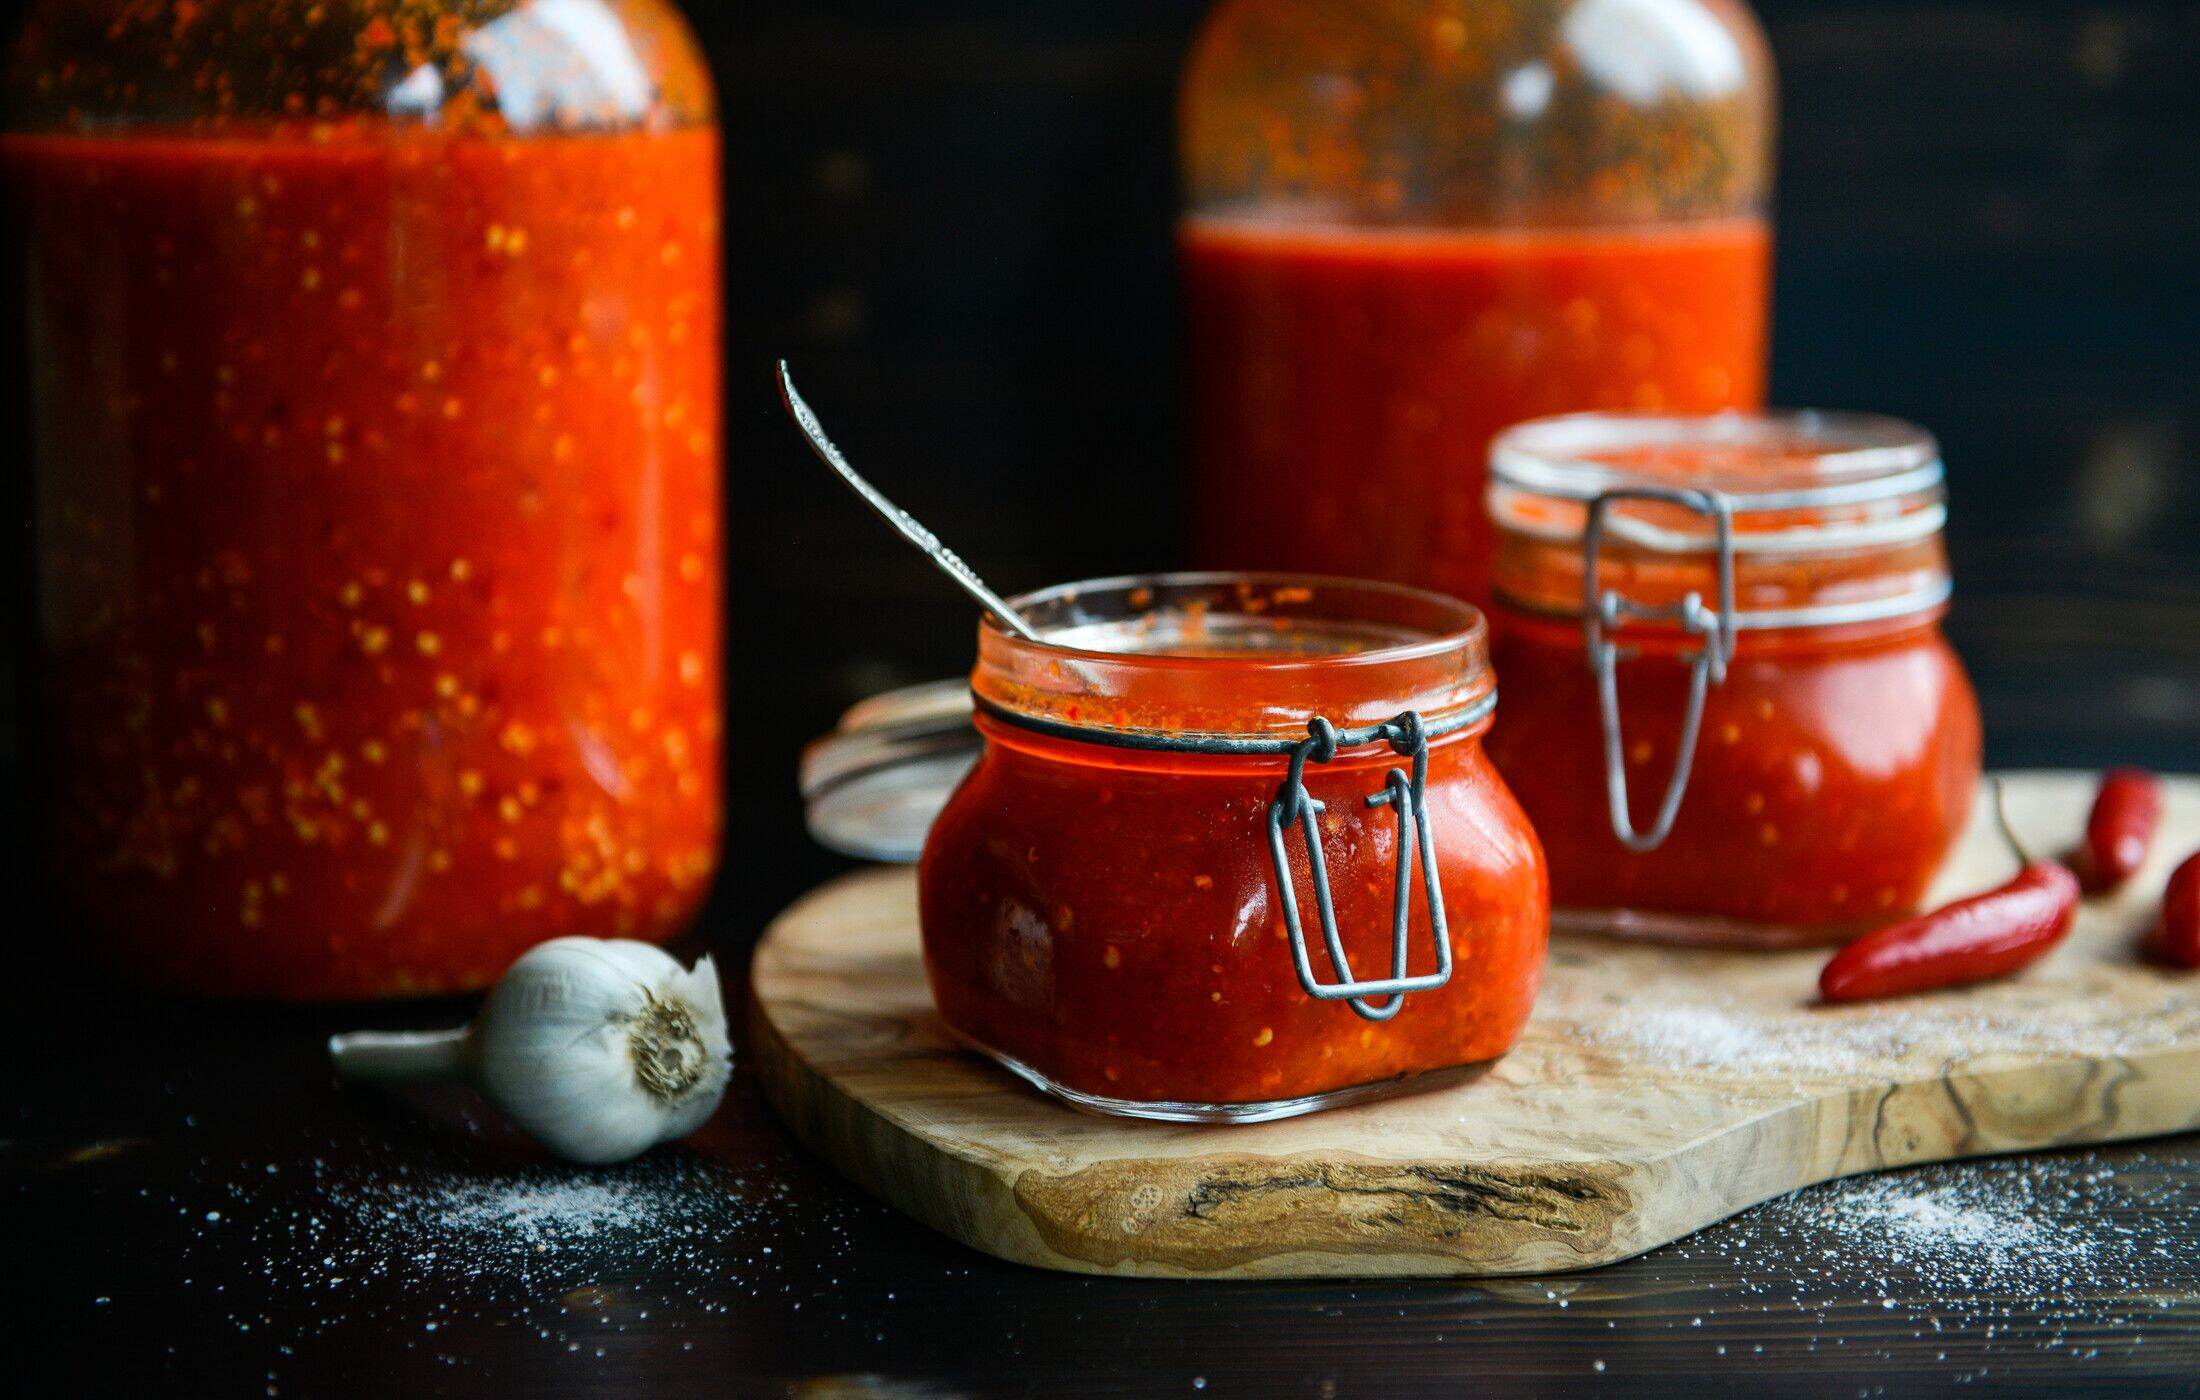 How to Make Fermented Hot Sauce At Home